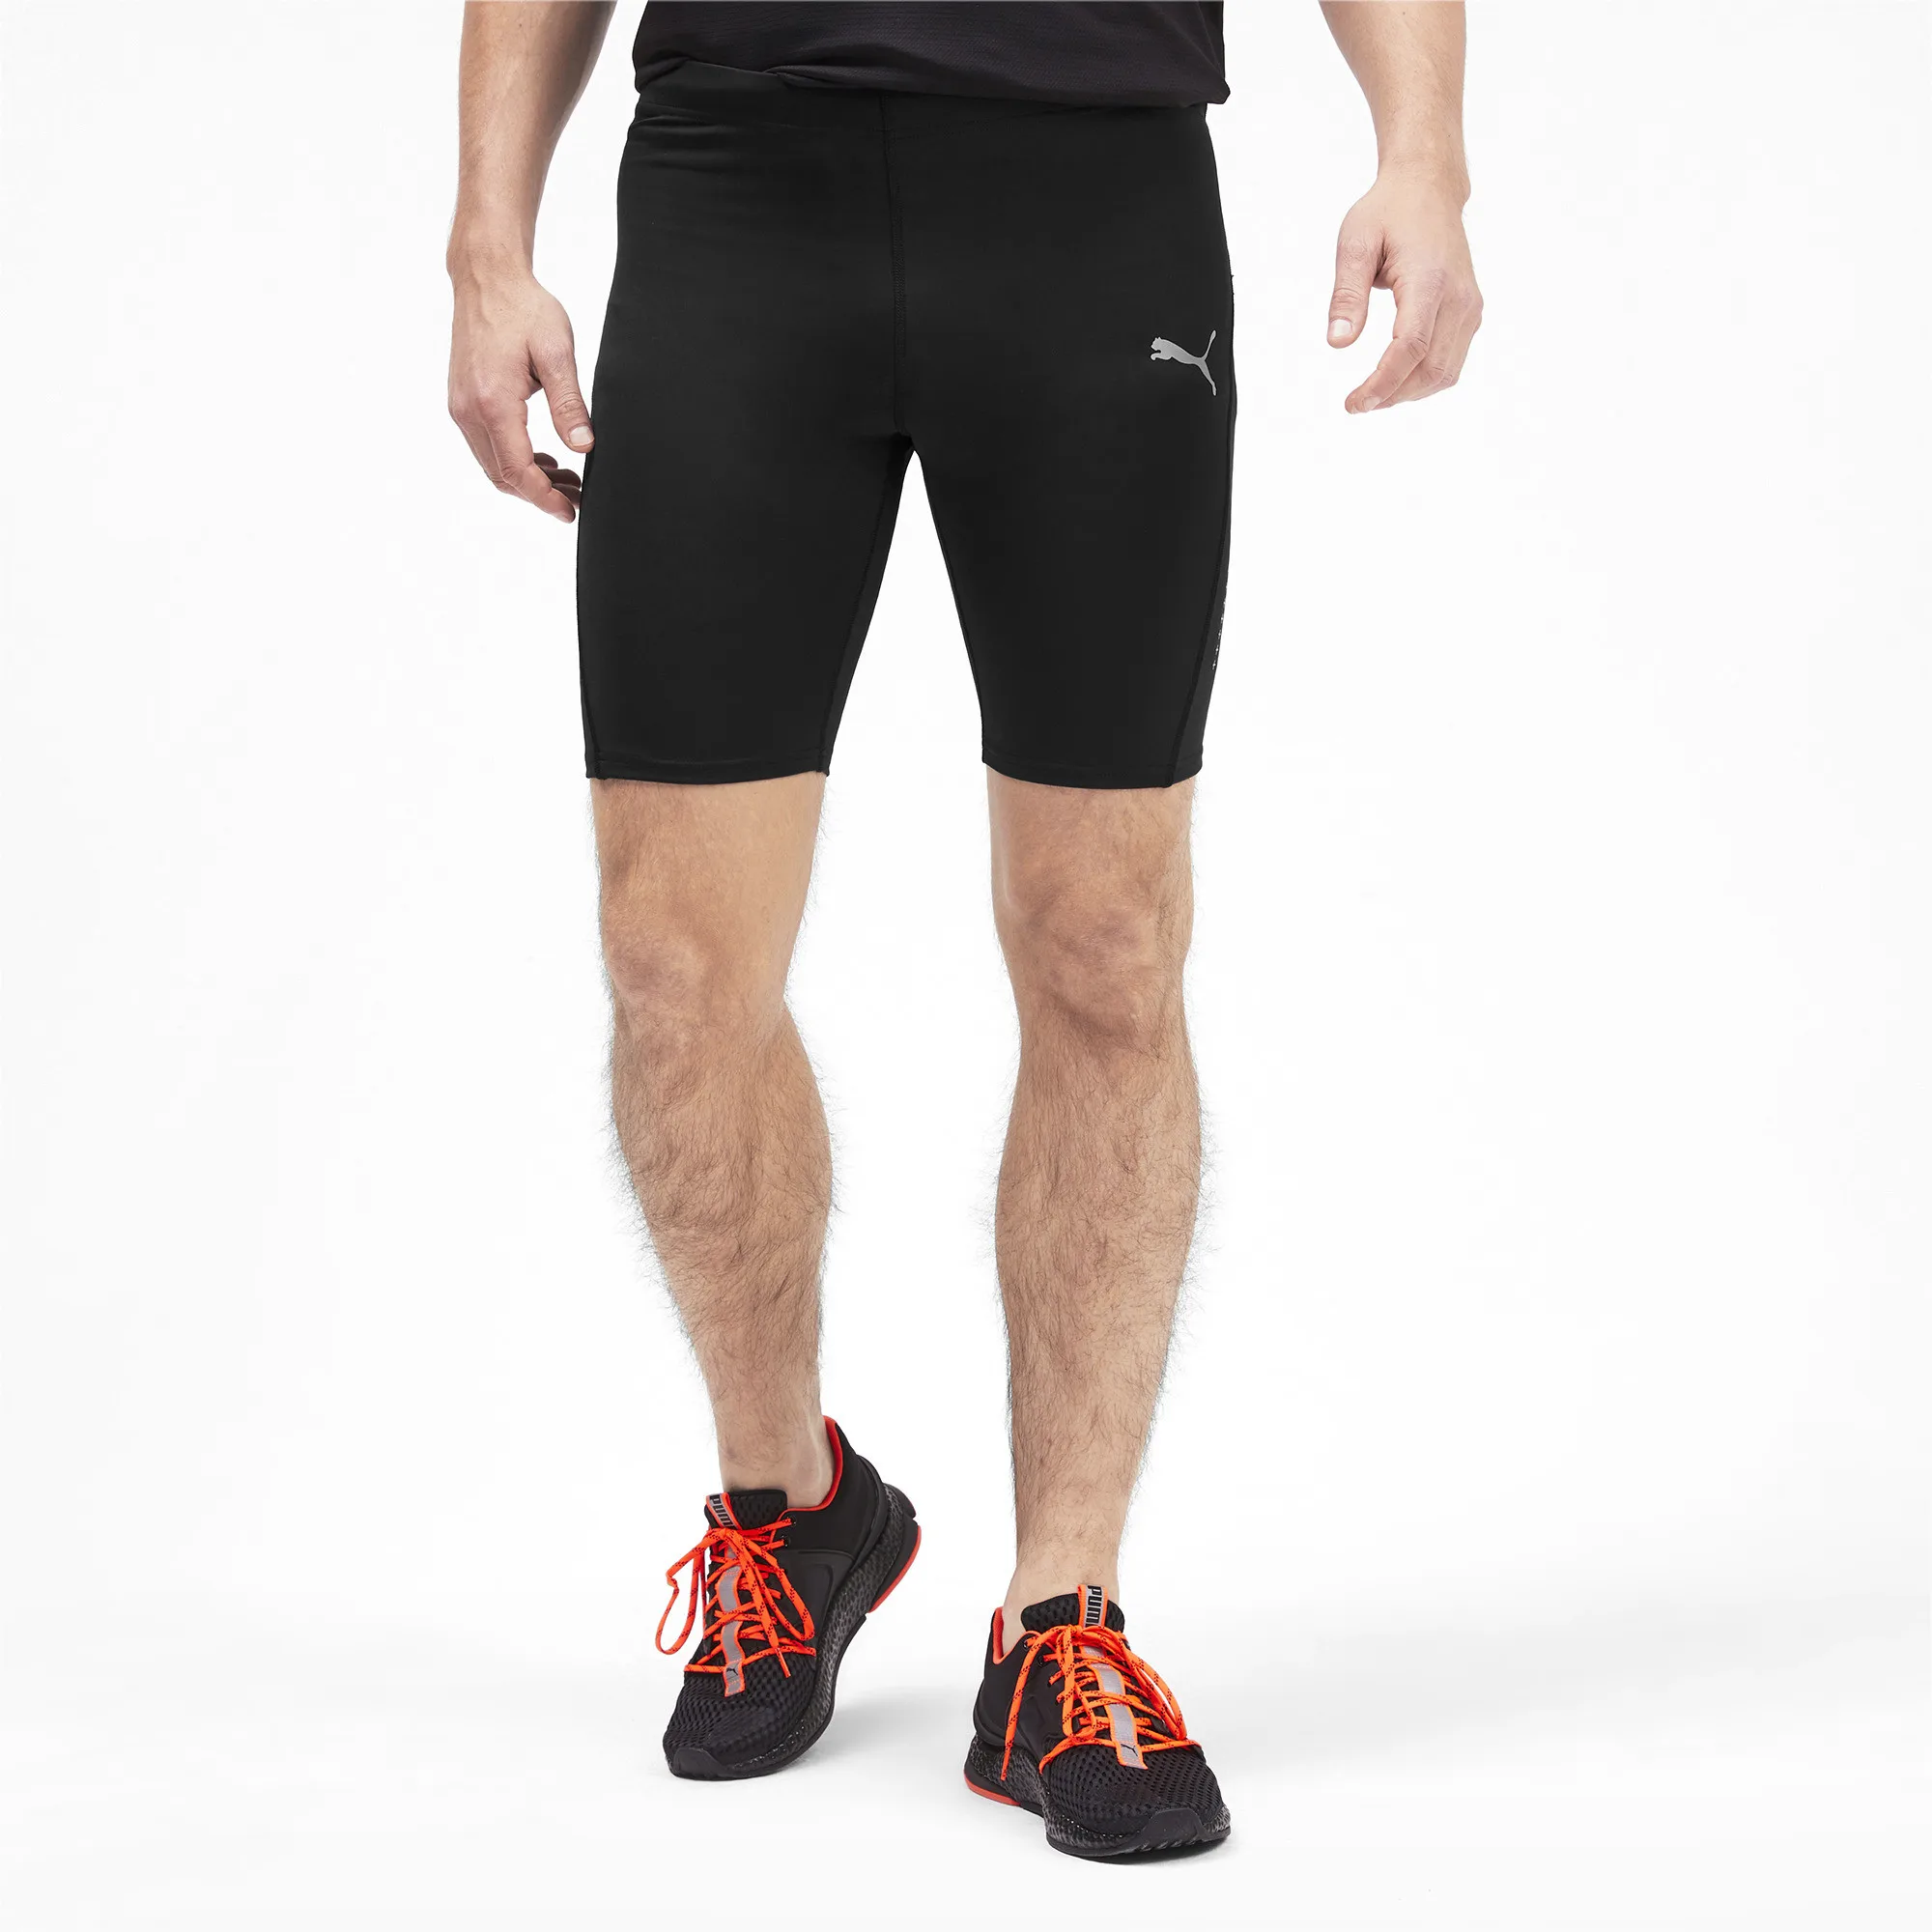 Men's shorts Ignite Short Tight Male clothing for sport fitness pants summer пума cougar puma - AliExpress